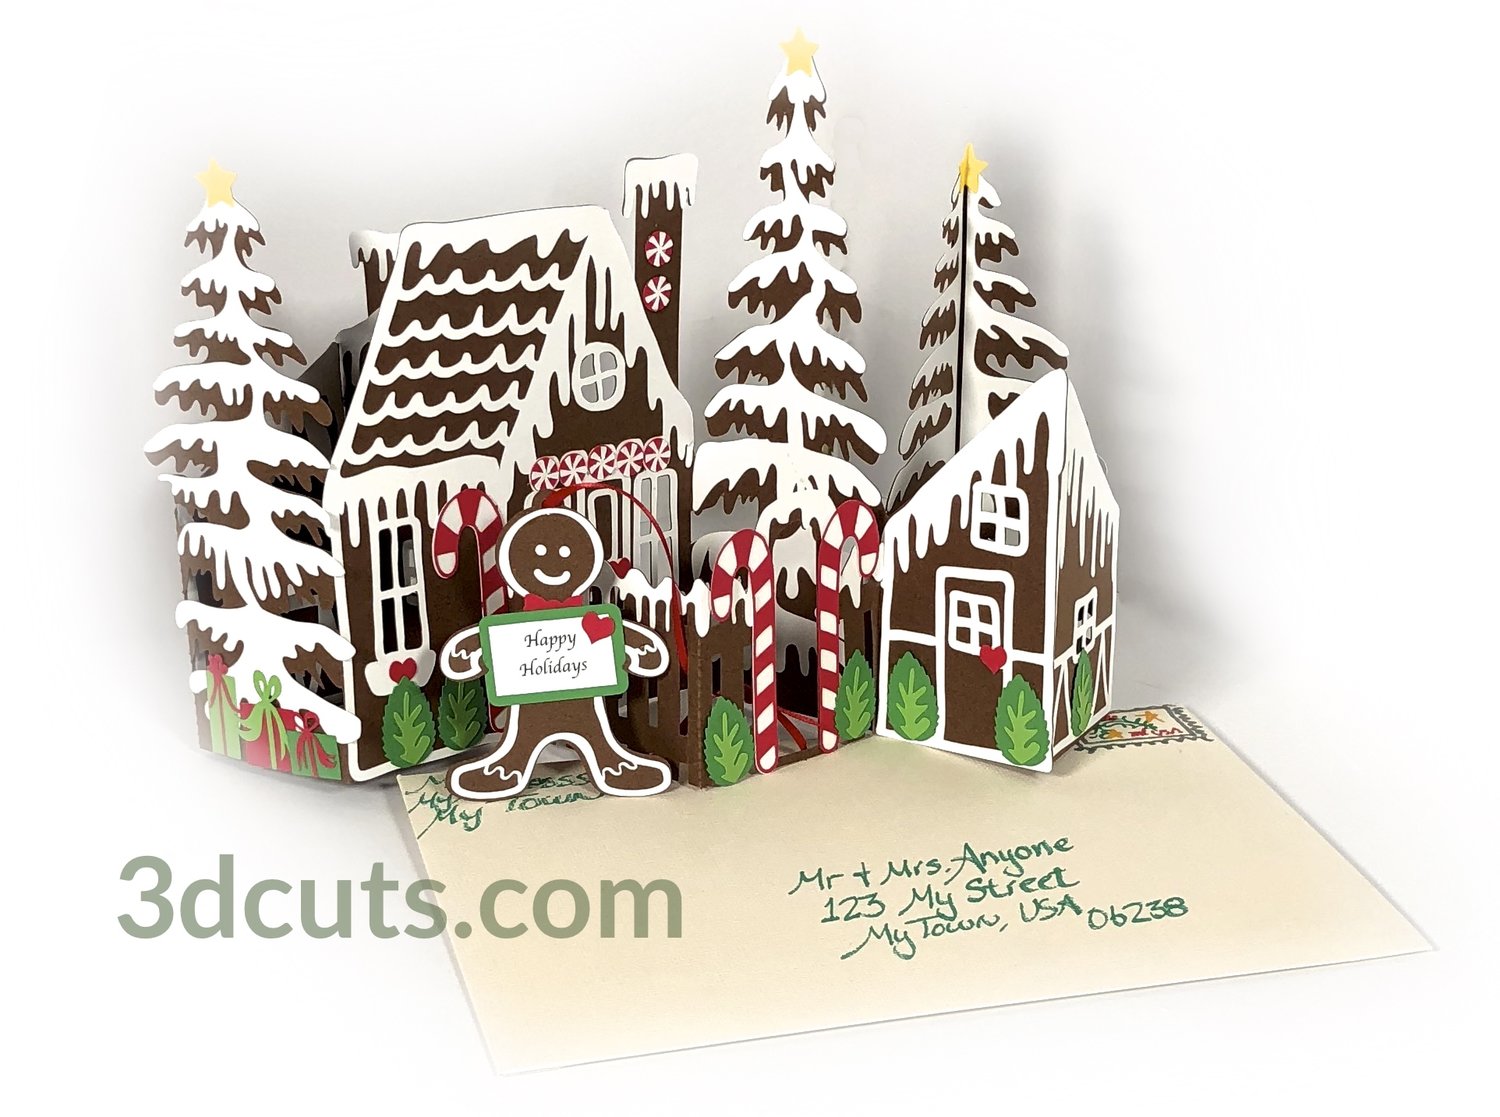 Download Zig Zag Gingerbread House Card Or Decor 3dcuts Com PSD Mockup Templates